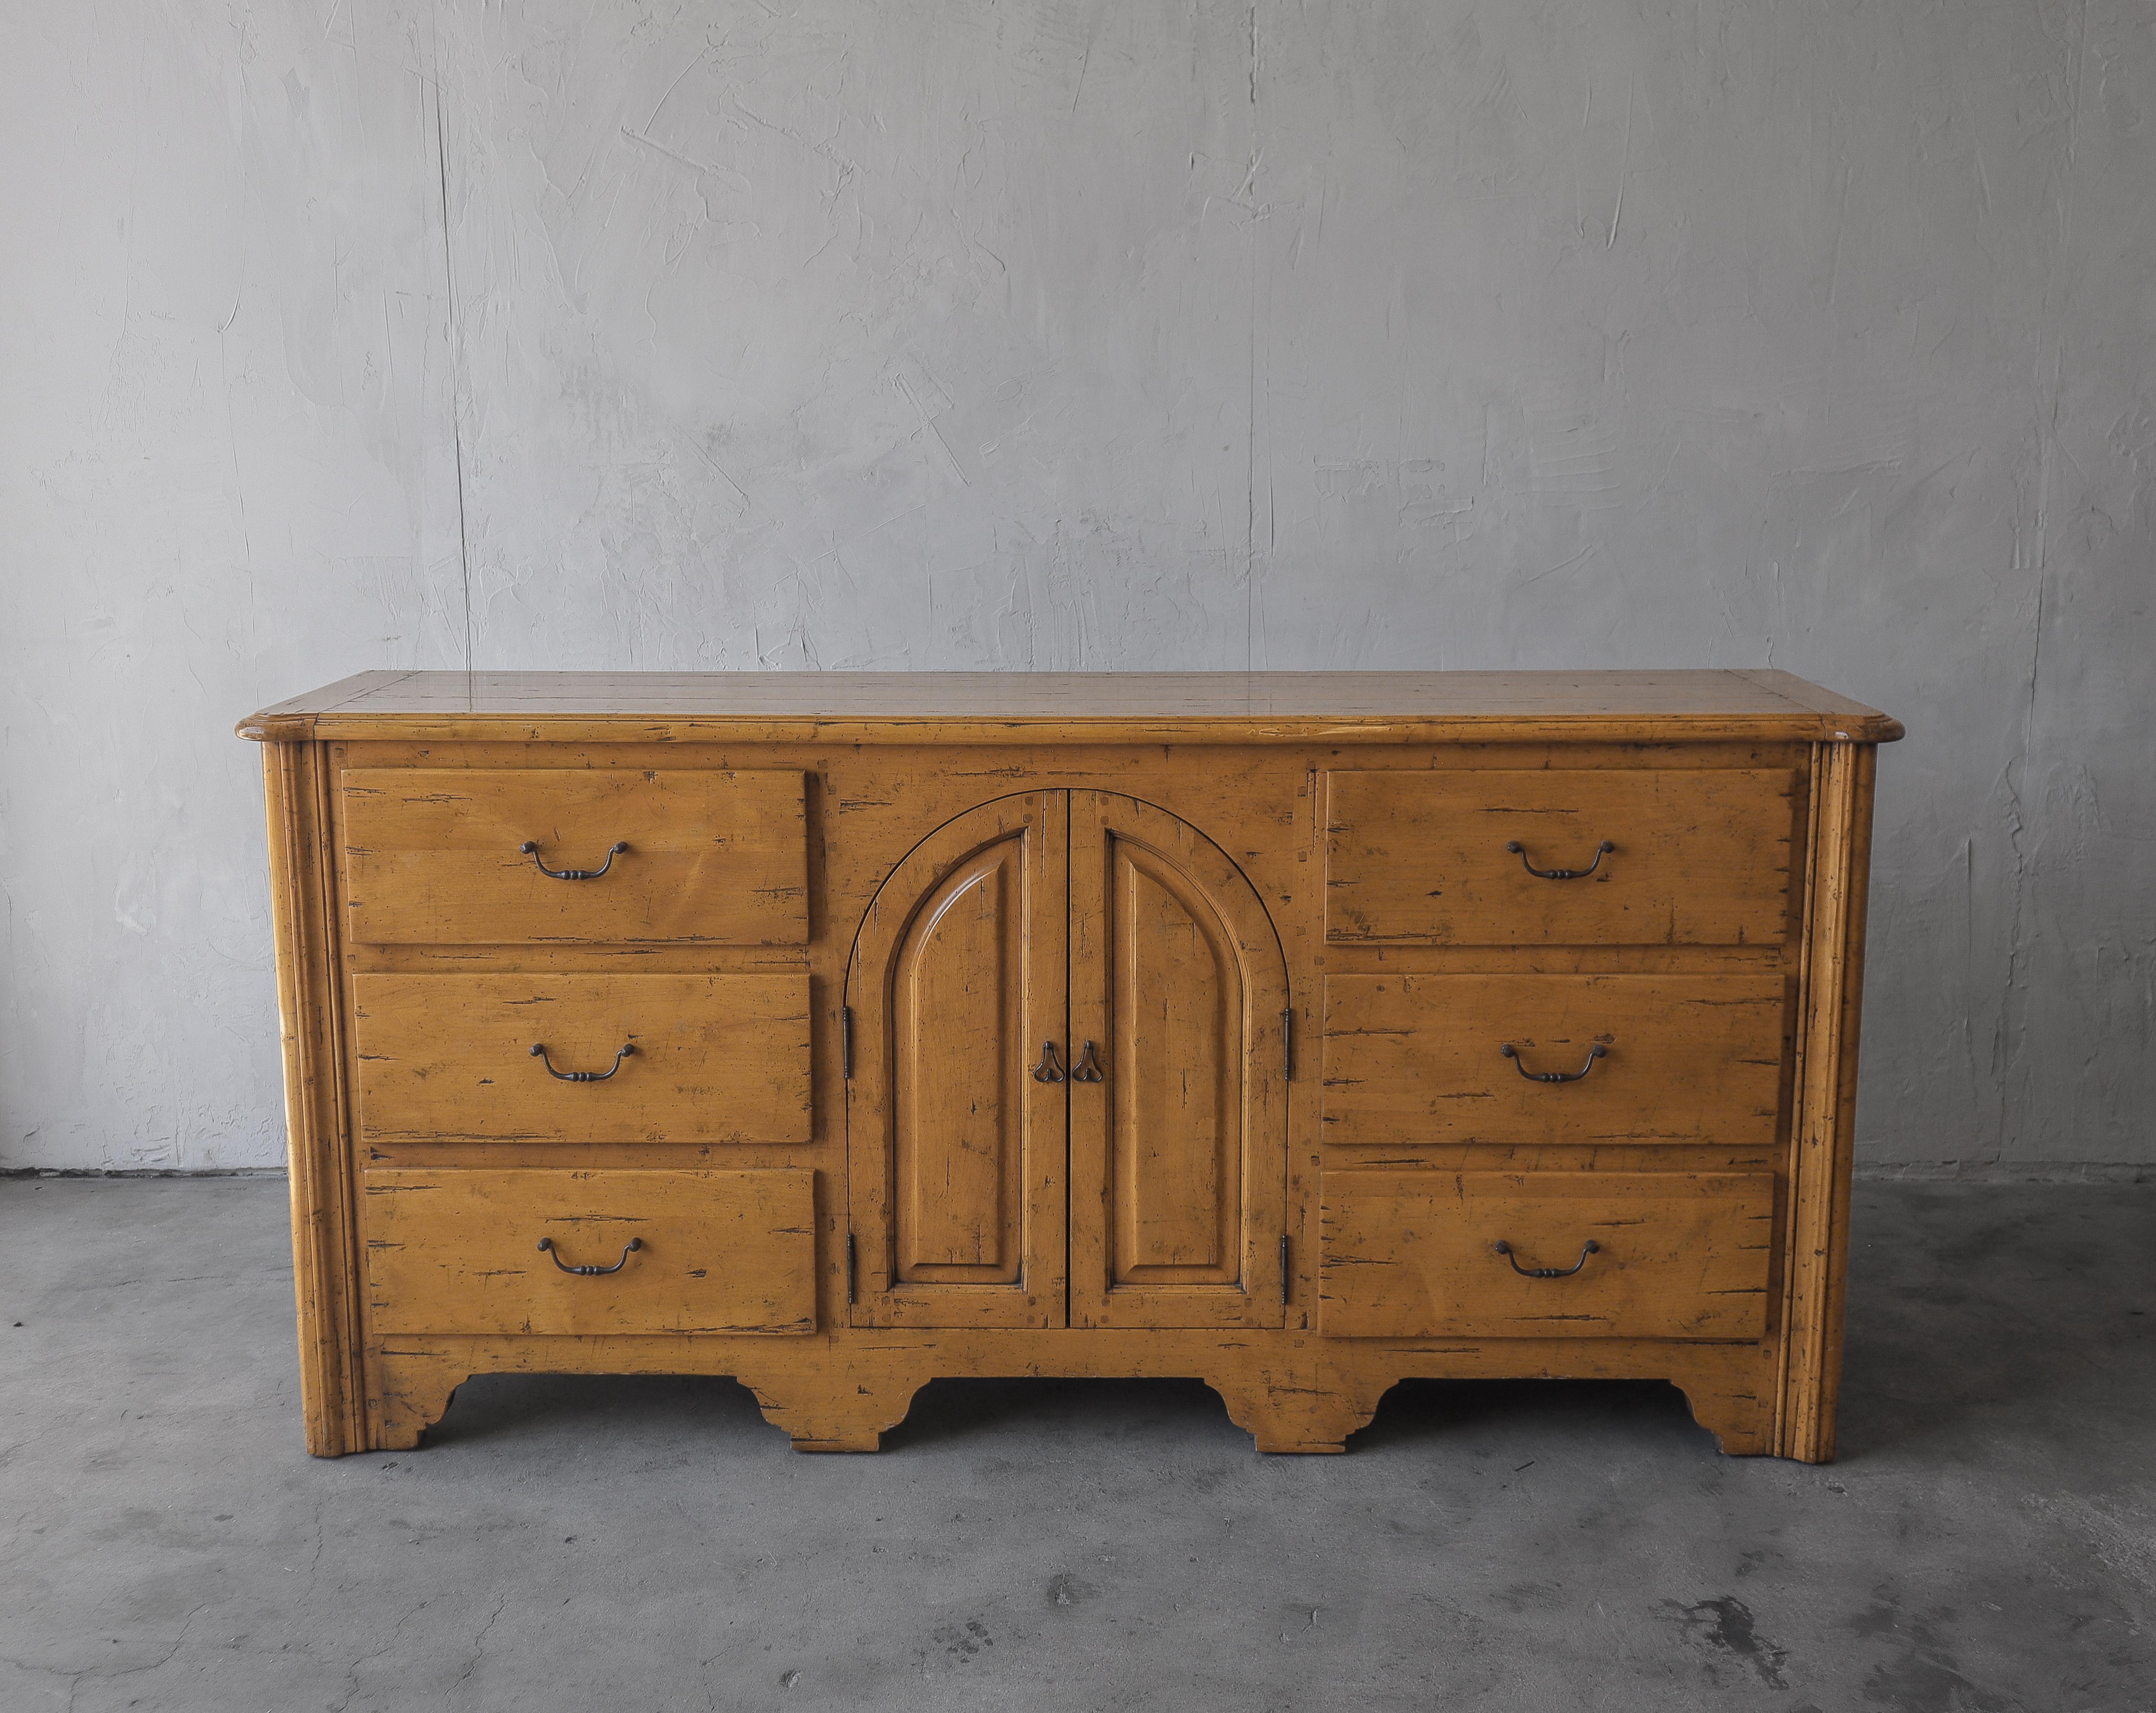 Unique rustic Spanish style cabinet in finished oak, a beautiful piece with artistic details.  A gorgeous, well made and heavy piece.  Insides of drawers are even finished.

Whether you use it in a dining, living or bedroom space, inside there is